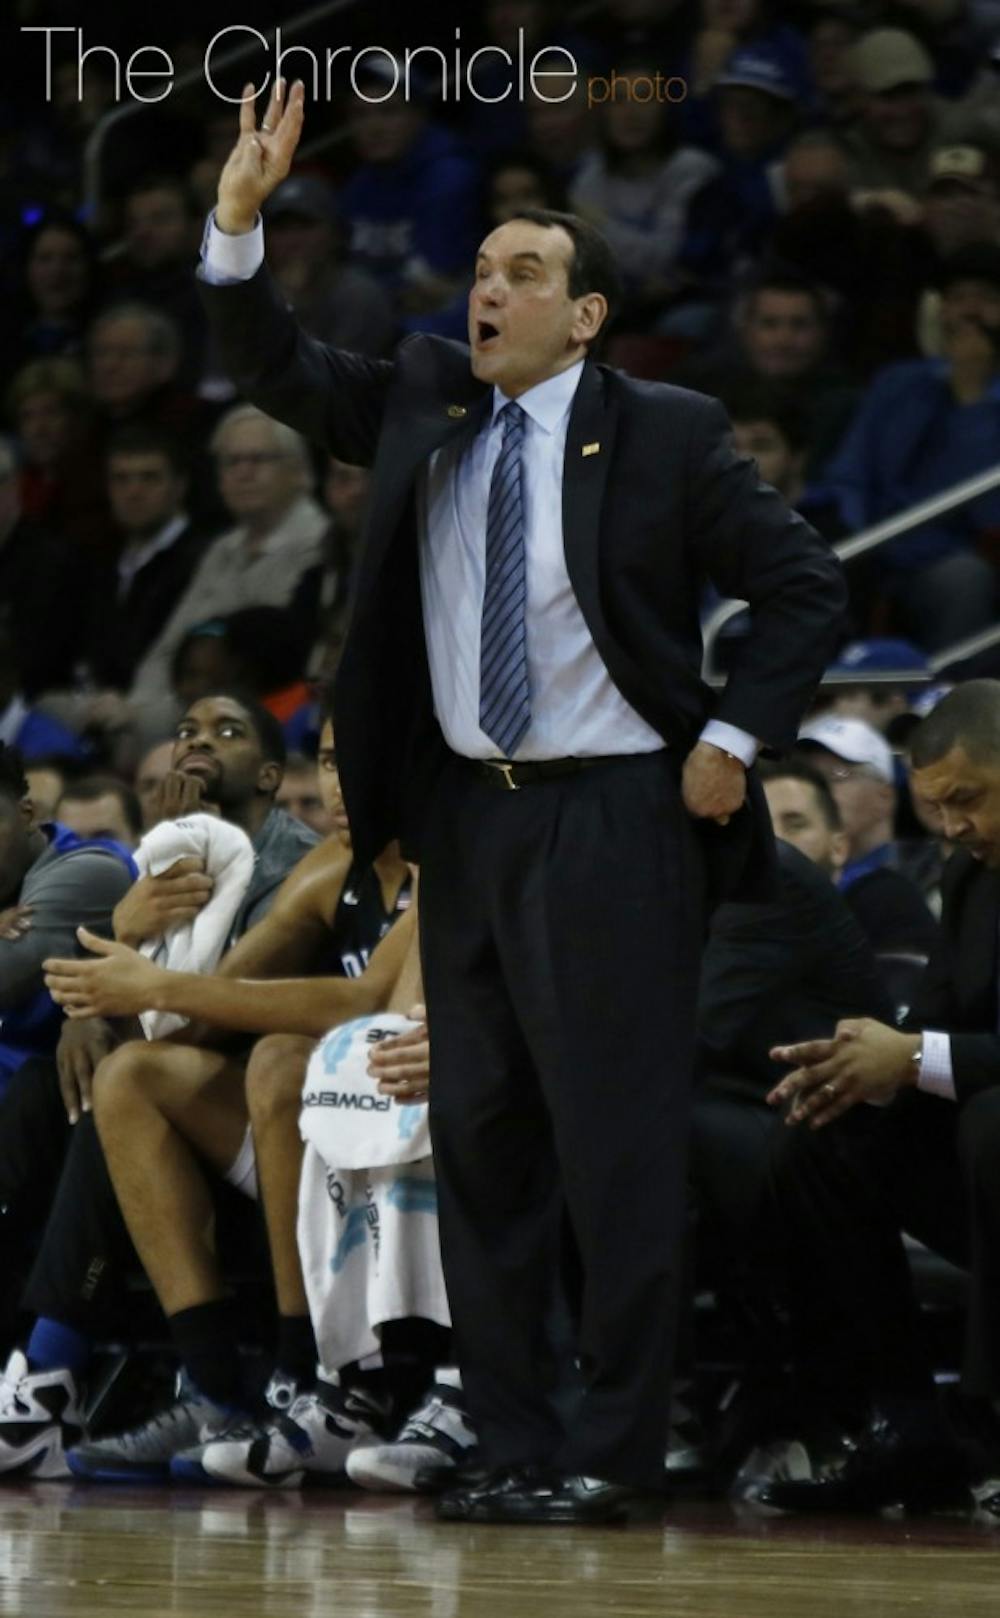 Duke head coach Mike Krzyzewski said he was pleased with his team's defensive effort Saturday after the Blue Devils yielded a season-high 81 points to Long Beach State in their nonconference finale Dec. 30.